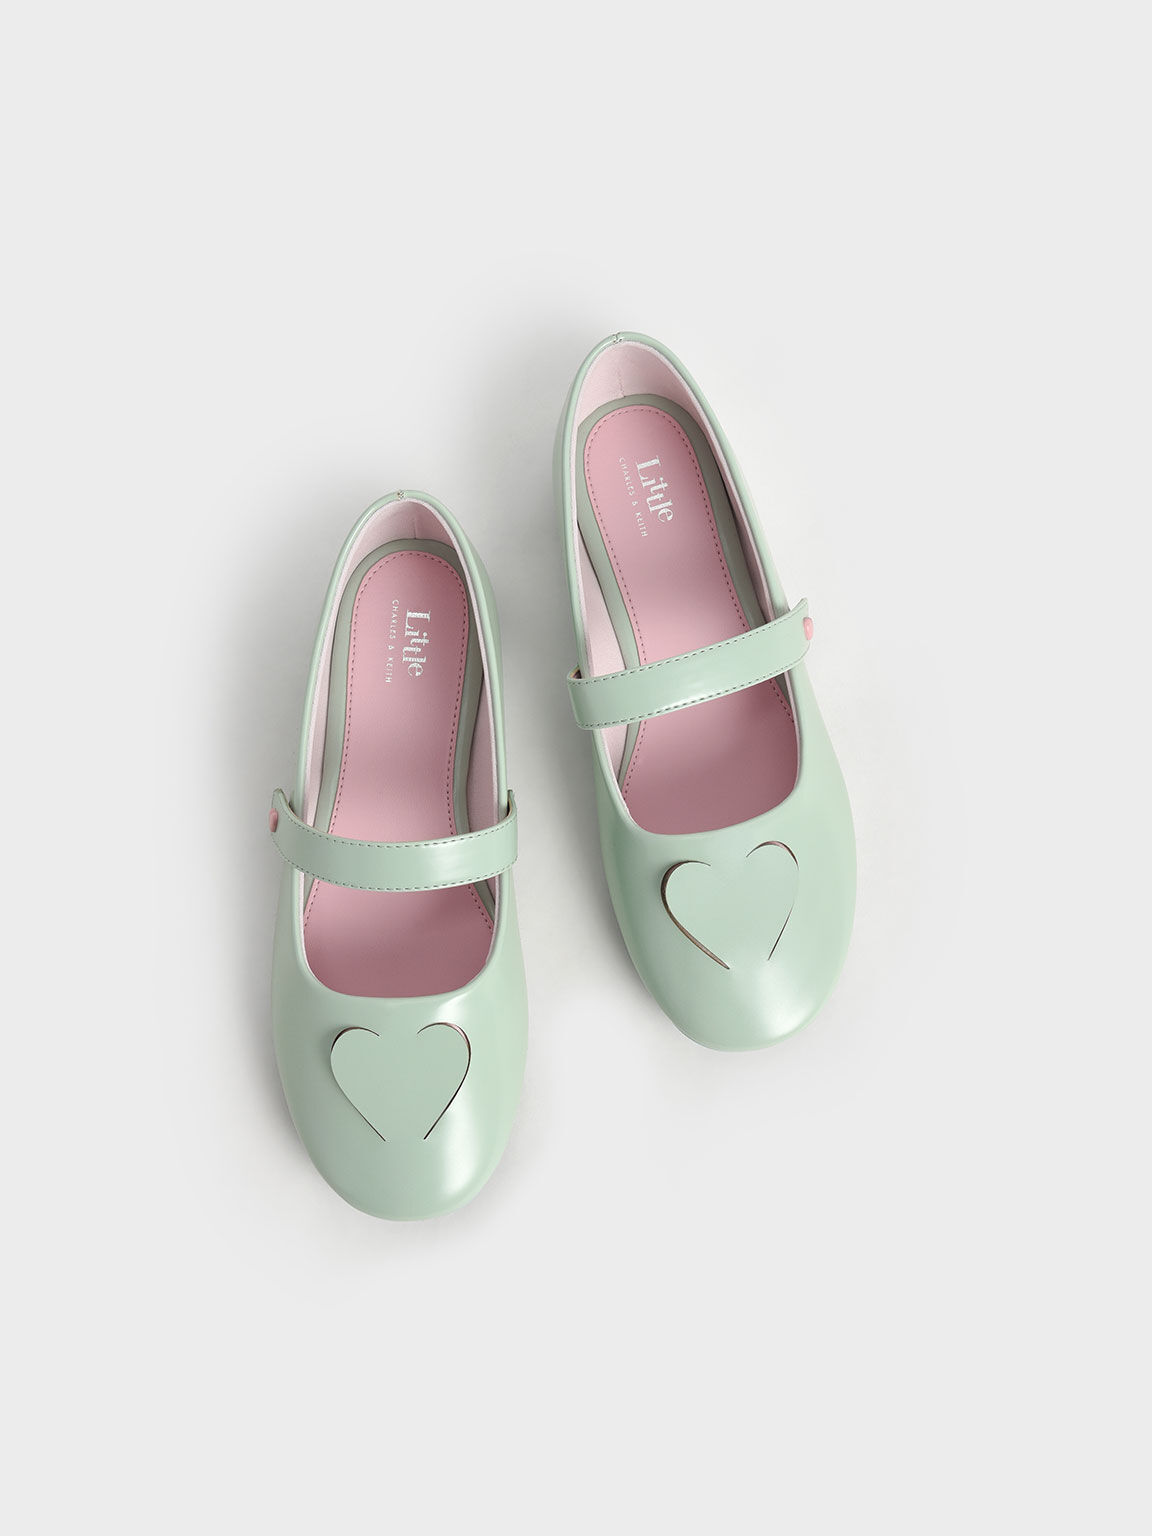 Girls' Heart Cut-Out Mary Janes, Light Green, hi-res